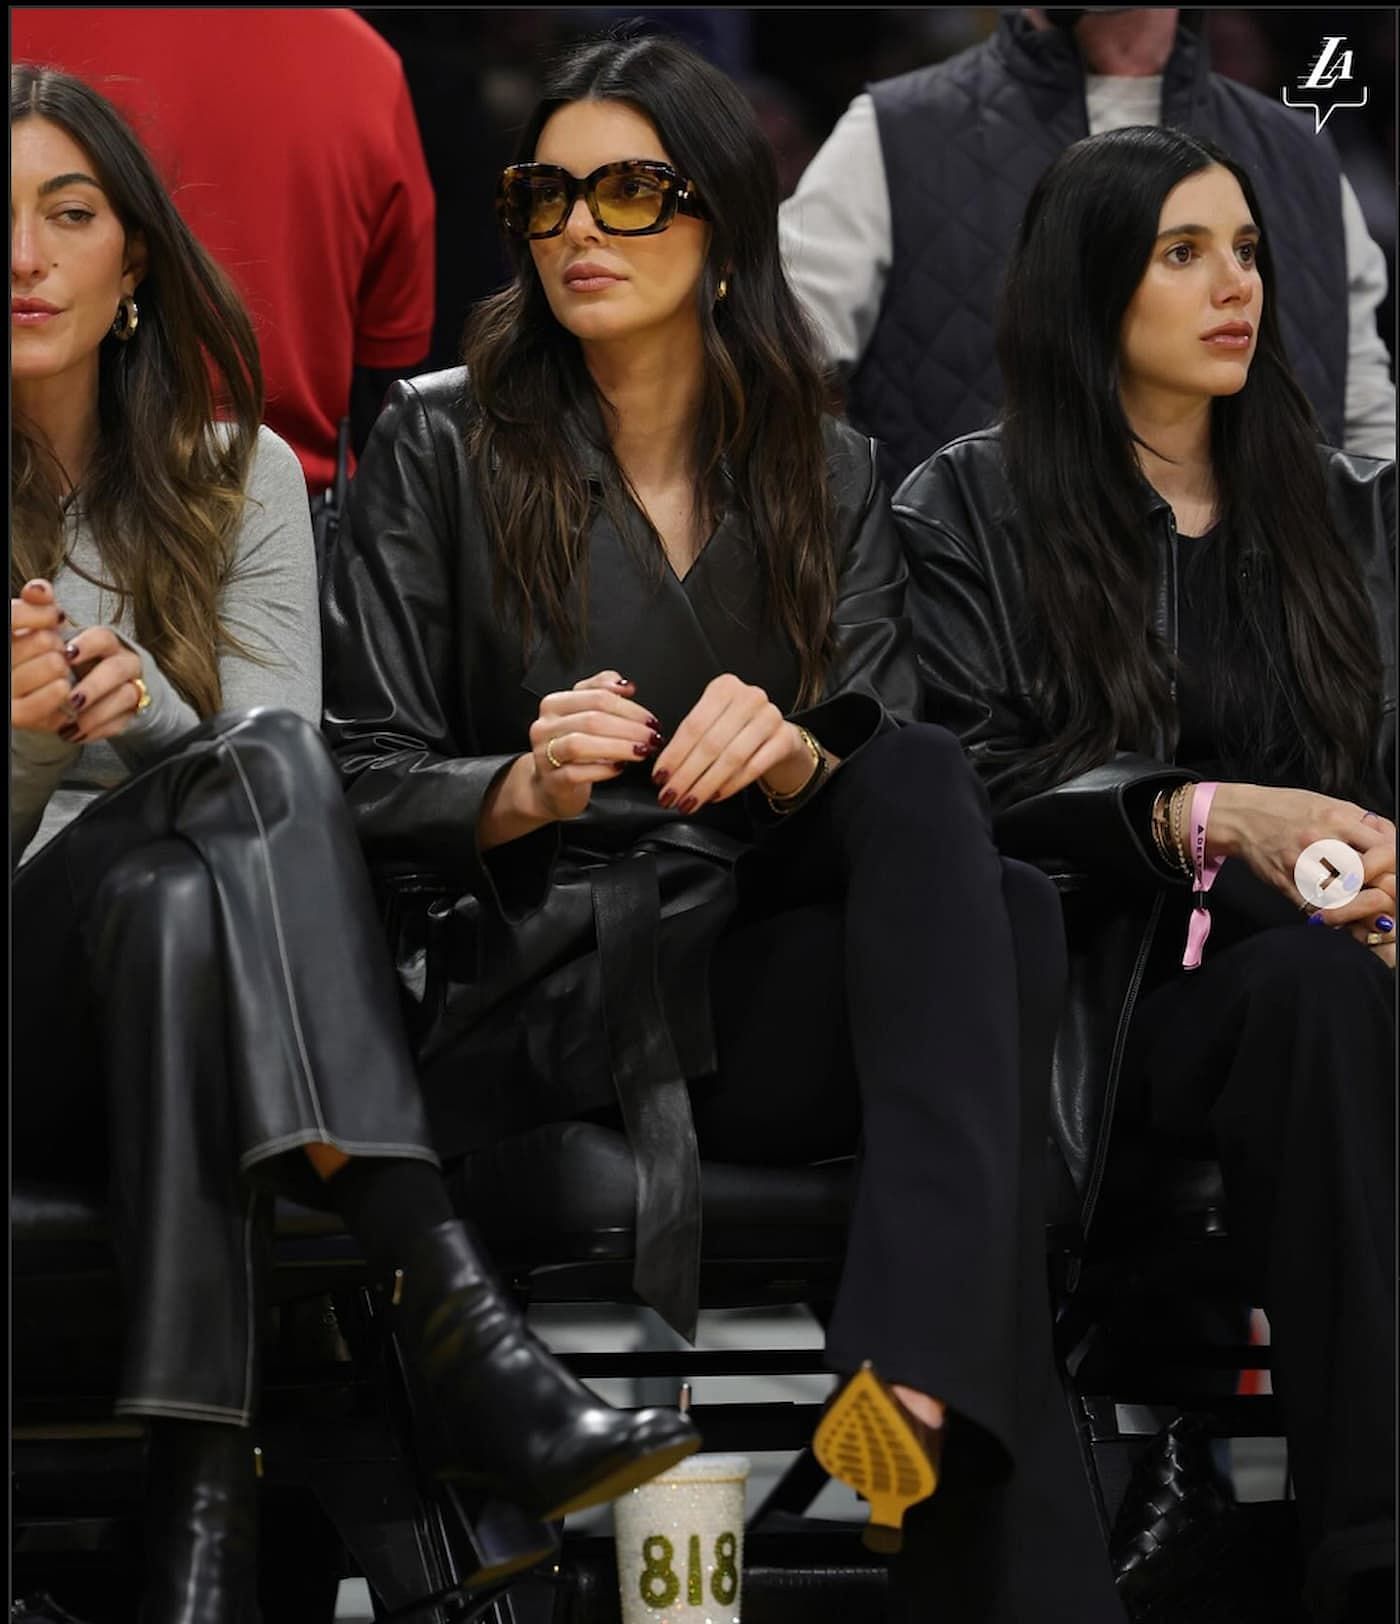 Kendall Jenner courtside at the Lakers game